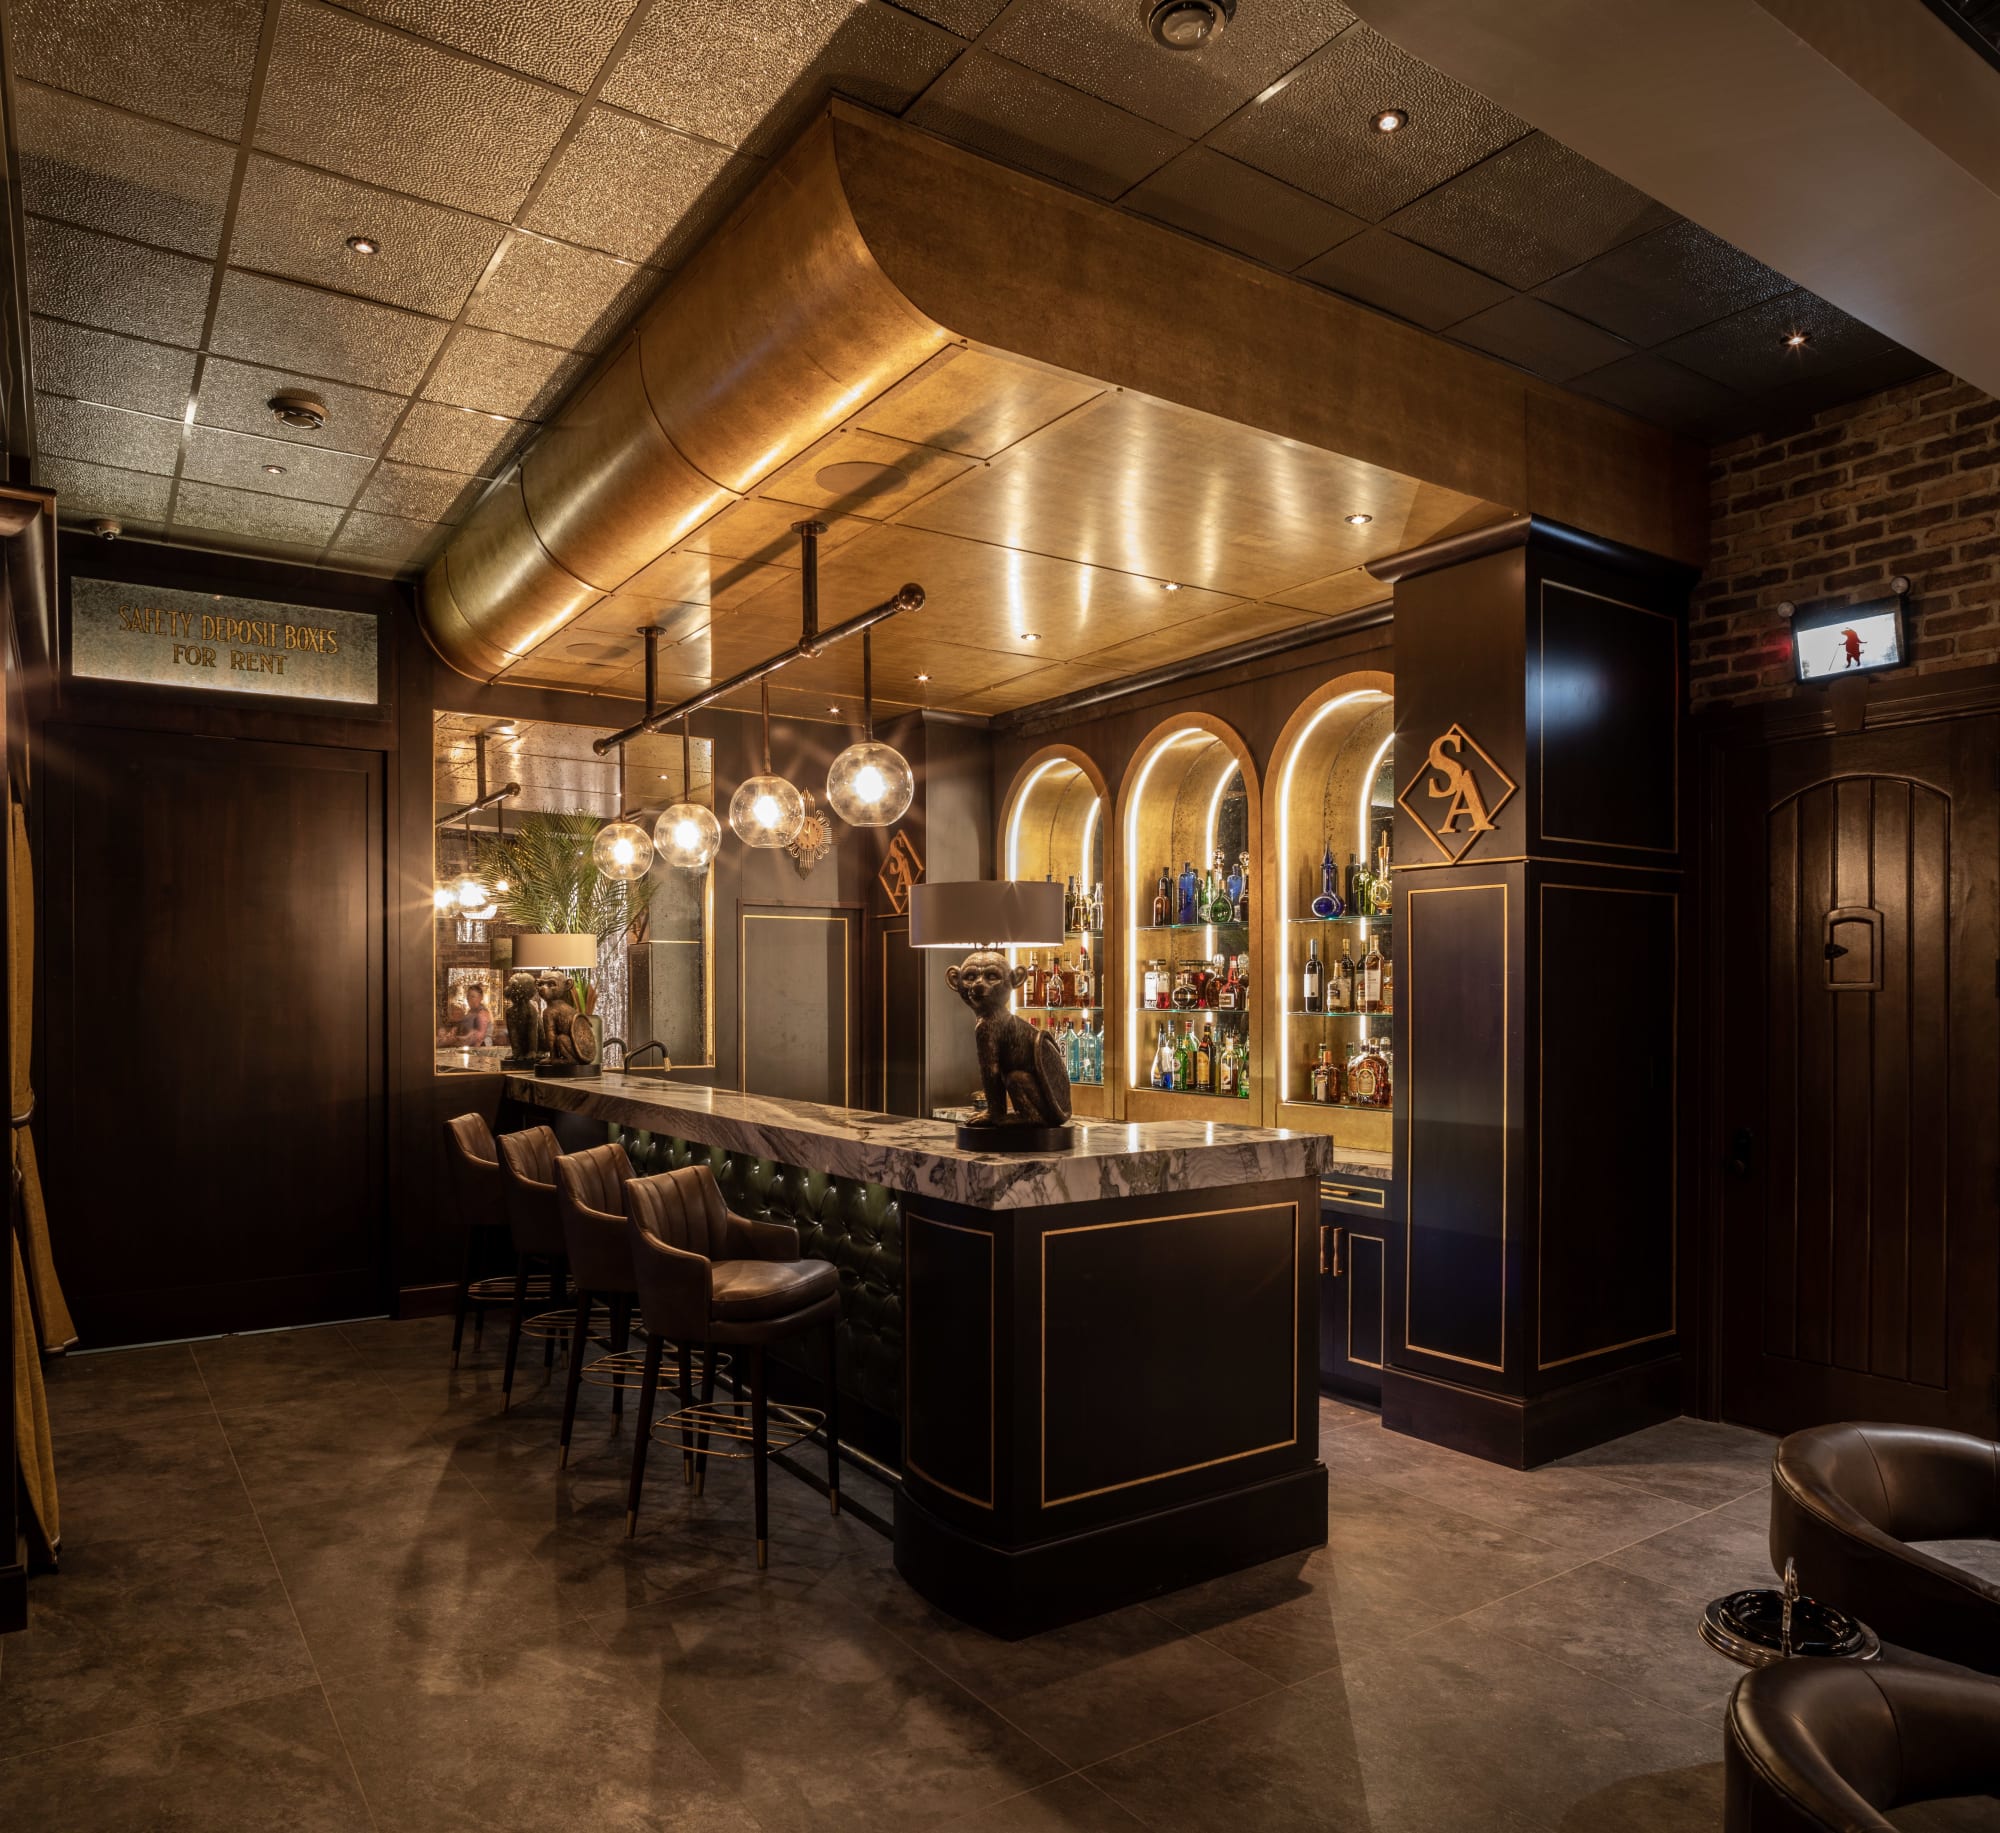 This Hotel Room Turned Hidden Speakeasy Is Showcasing Some of the